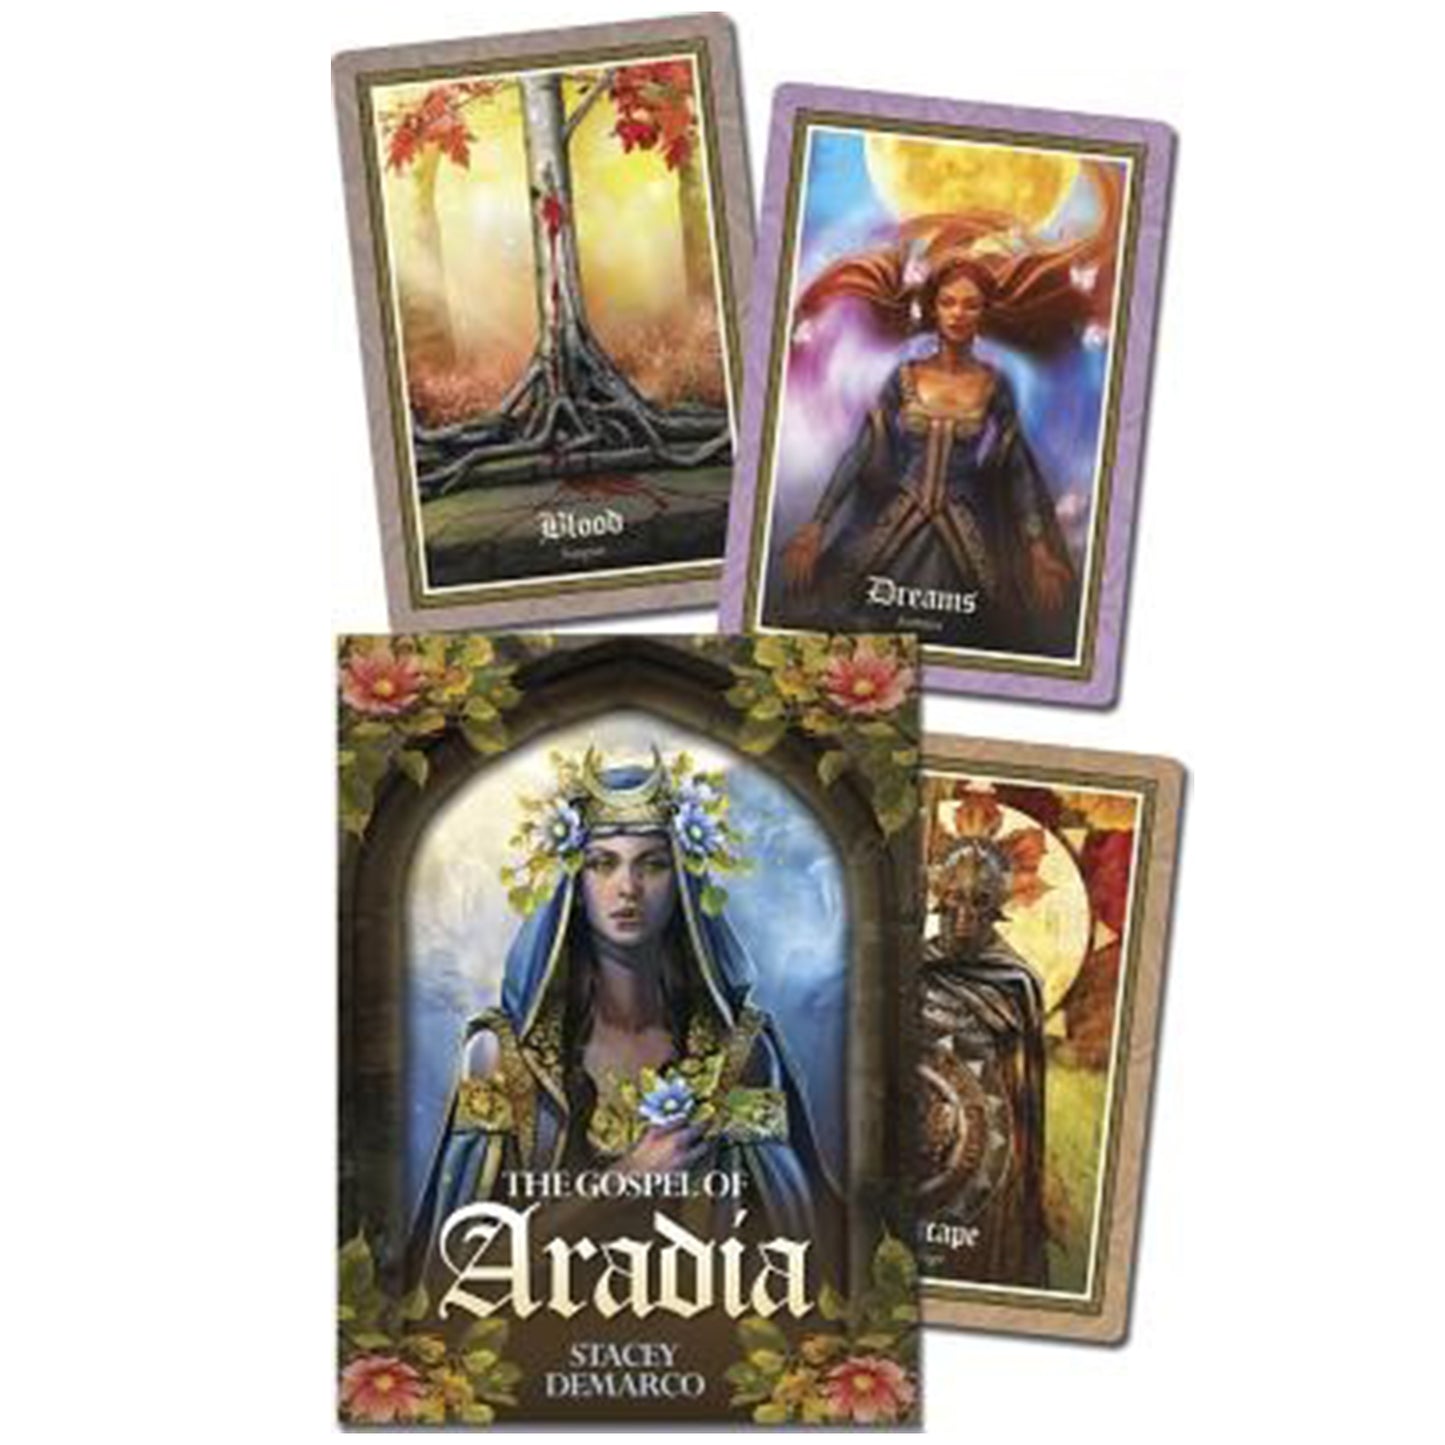 The Gospel of Aradia Oracle Card Set Box and Card Examples | Happy Piranha